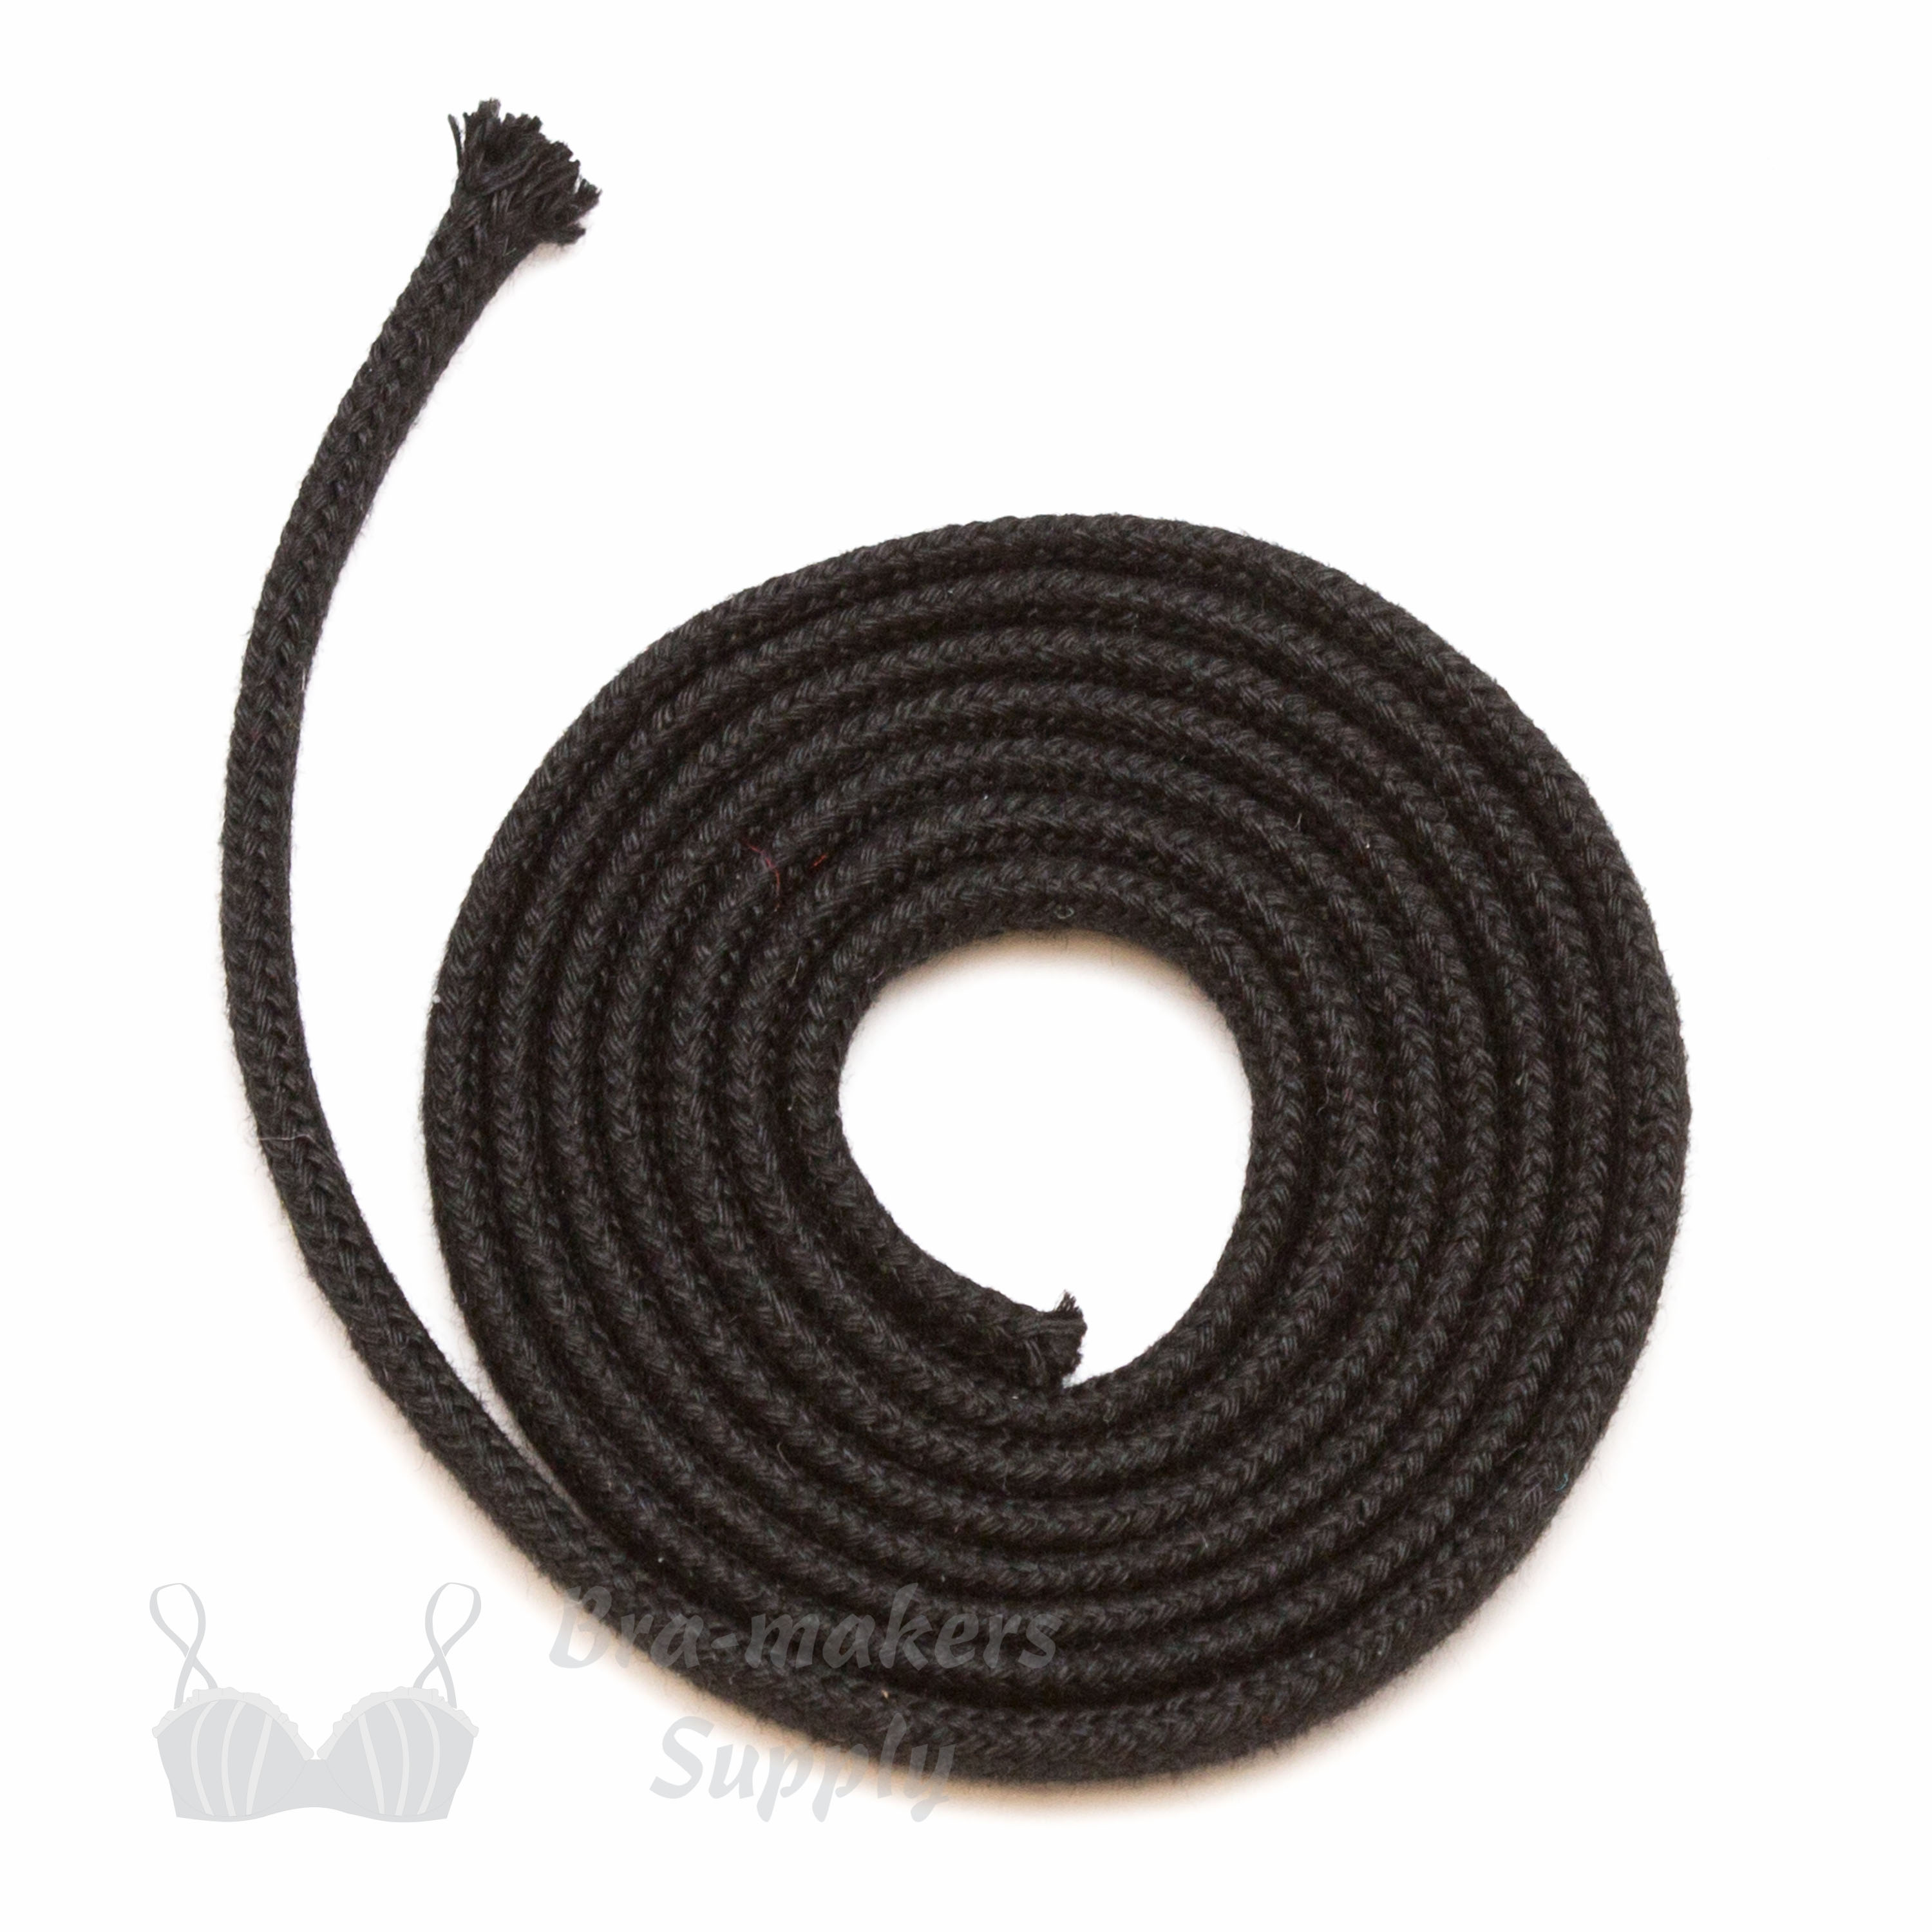 Corset Lacing Cord - strong cord for corsets - Bra-Makers Supply